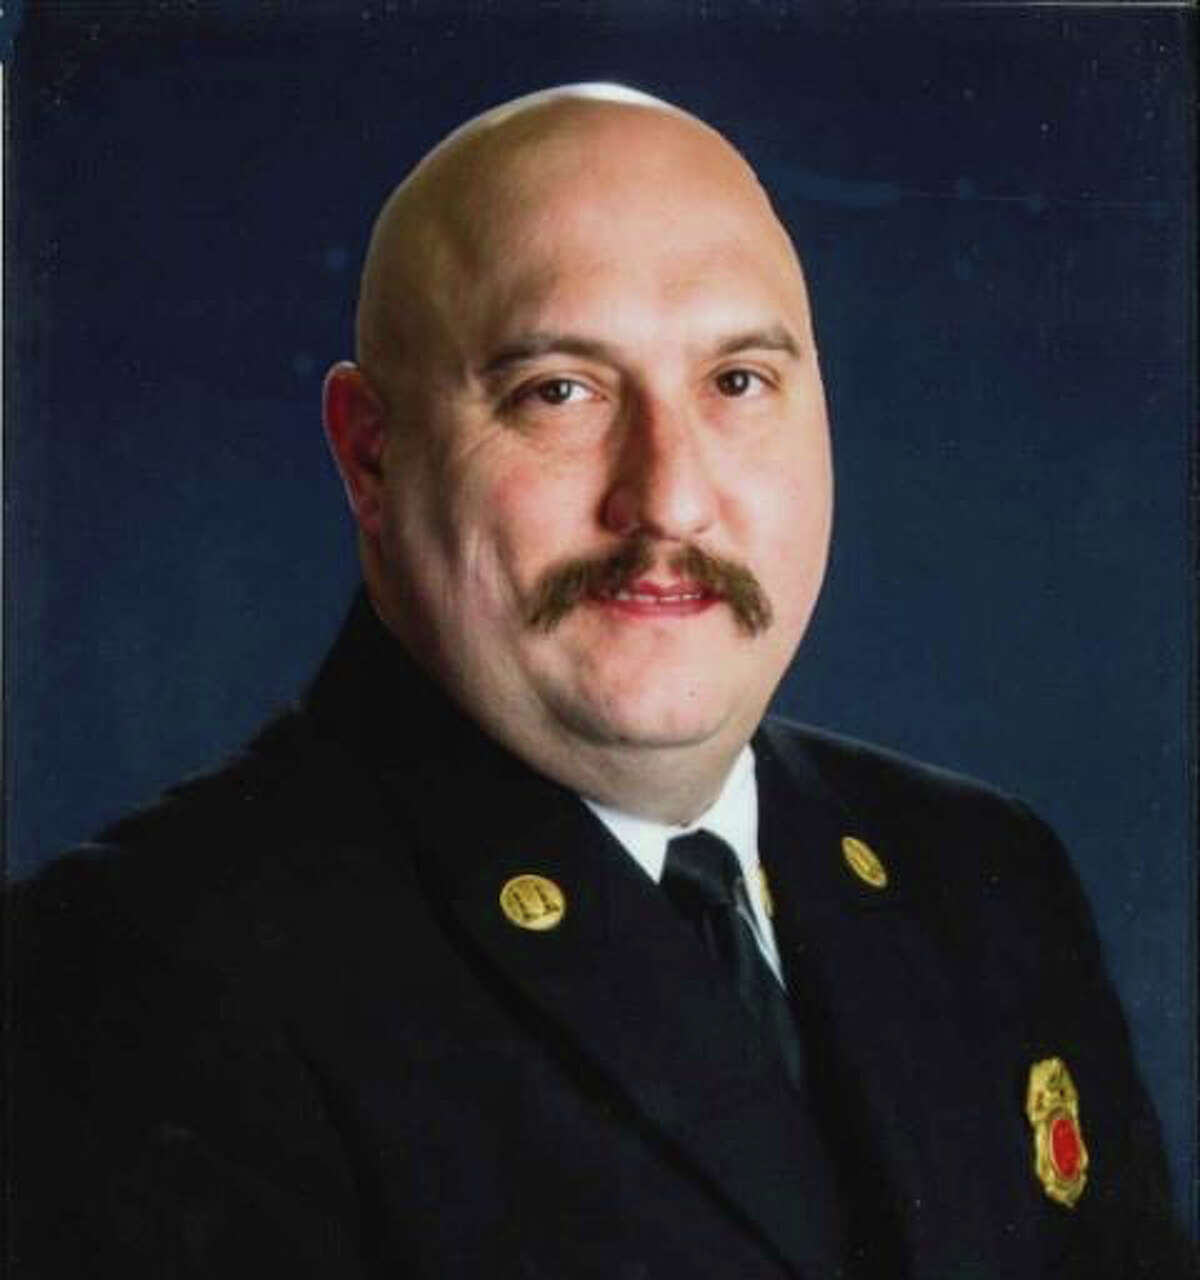 New Braunfels Interim Chief Patrick O'Connell has been named the new fire chief at the New Braunfels Fire Department. He will be sworn in Sept. 23 at the New Braunfels City Council.